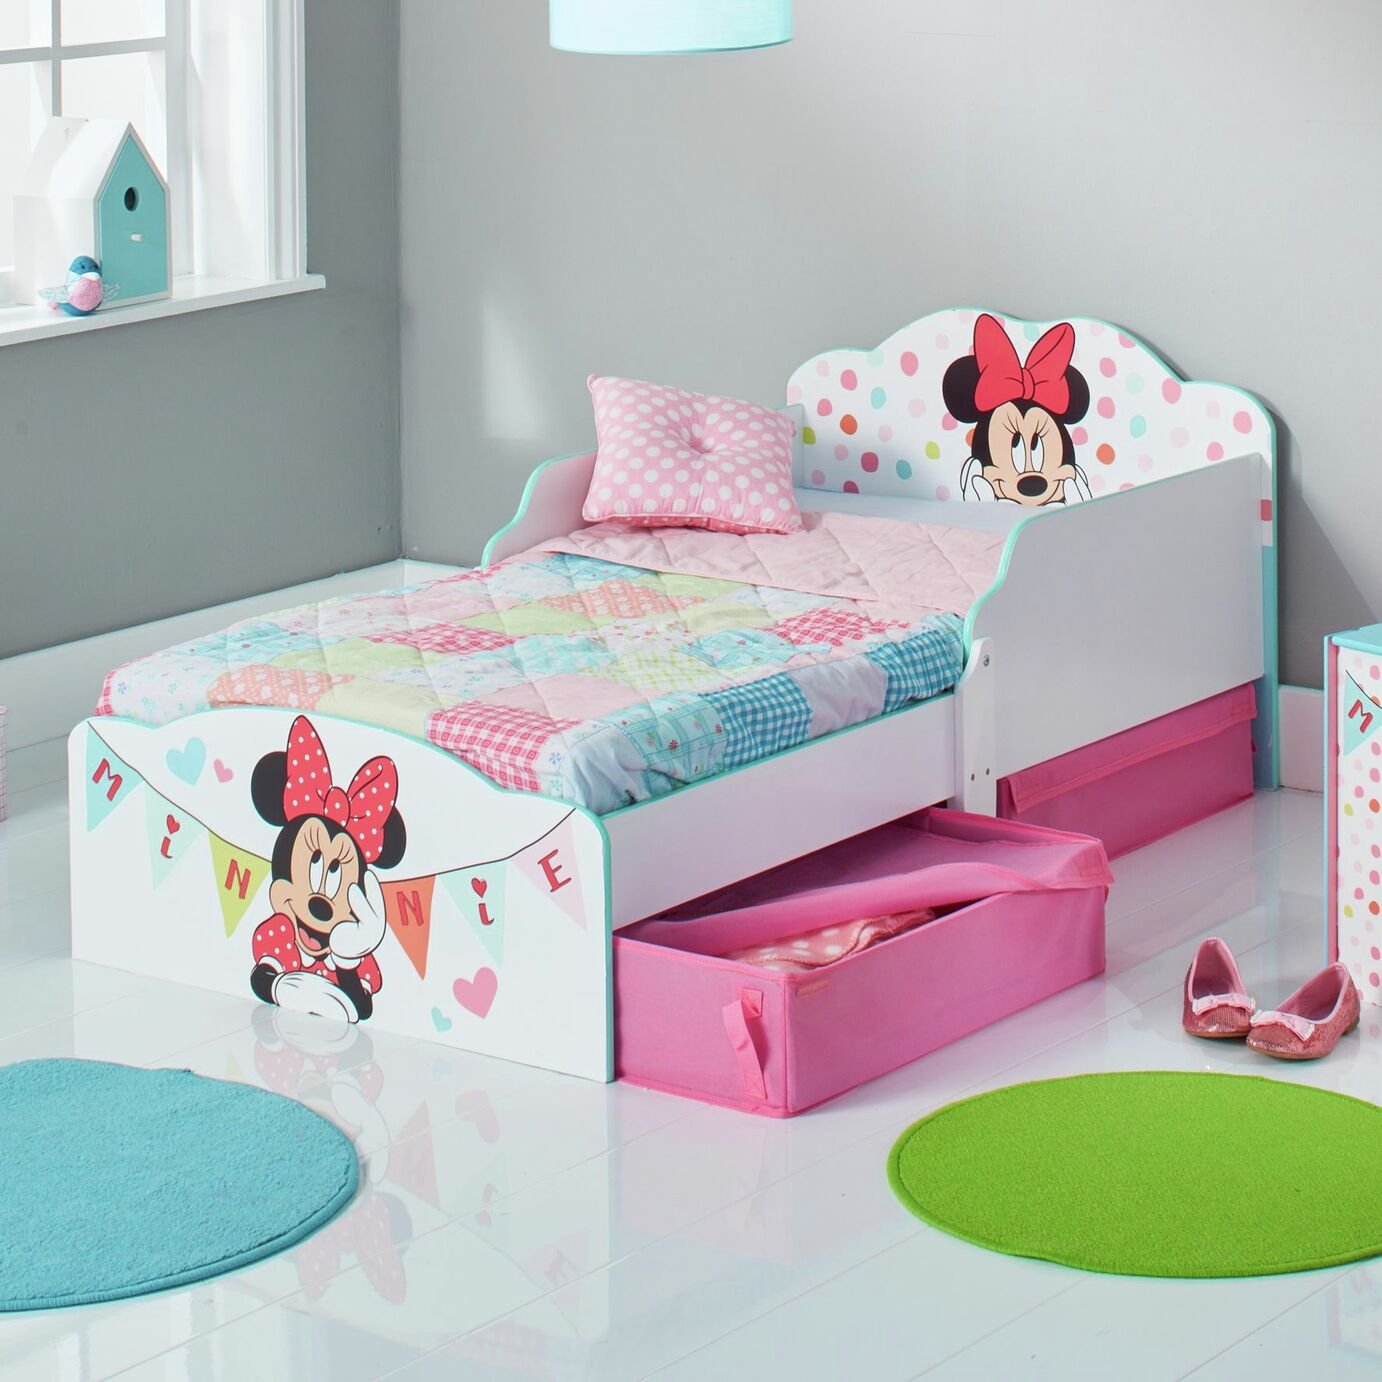 Disney Minnie Mouse Toddler Bed, Drawers & Kids Mattress Review